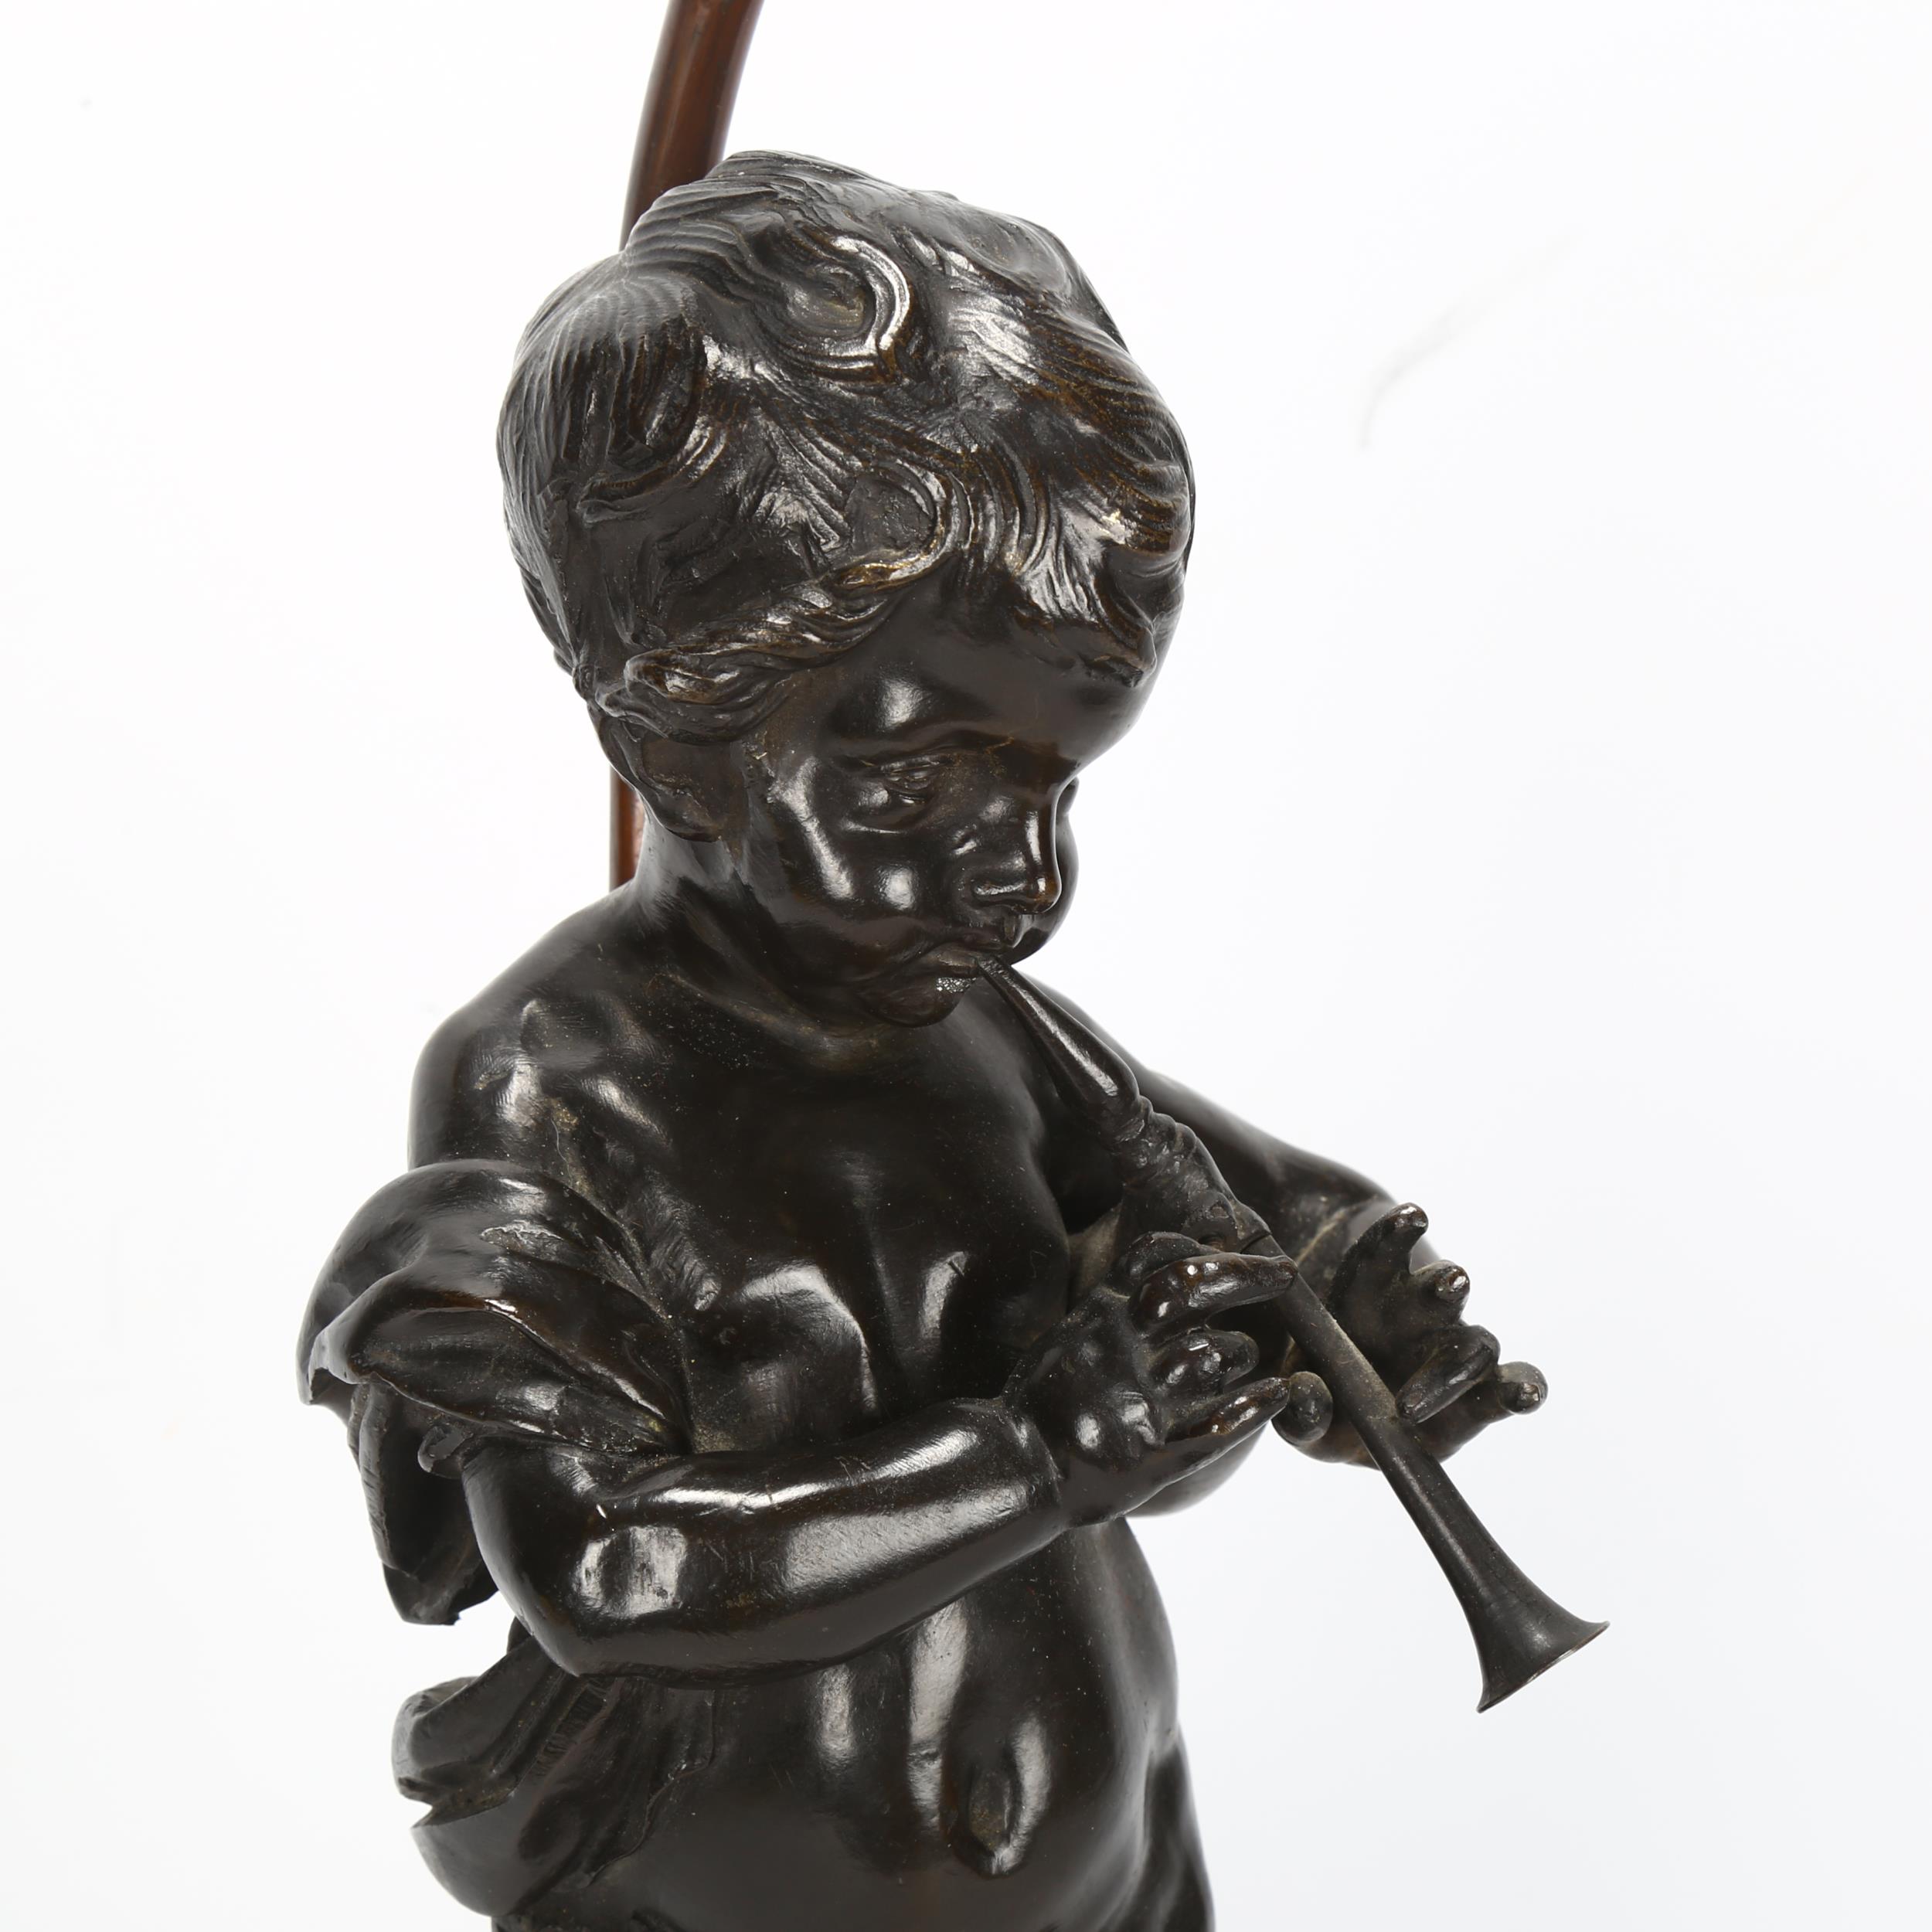 An Antique bronze cherub sculpture playing pipes, on marble base with lamp fitting, bronze height - Image 3 of 3